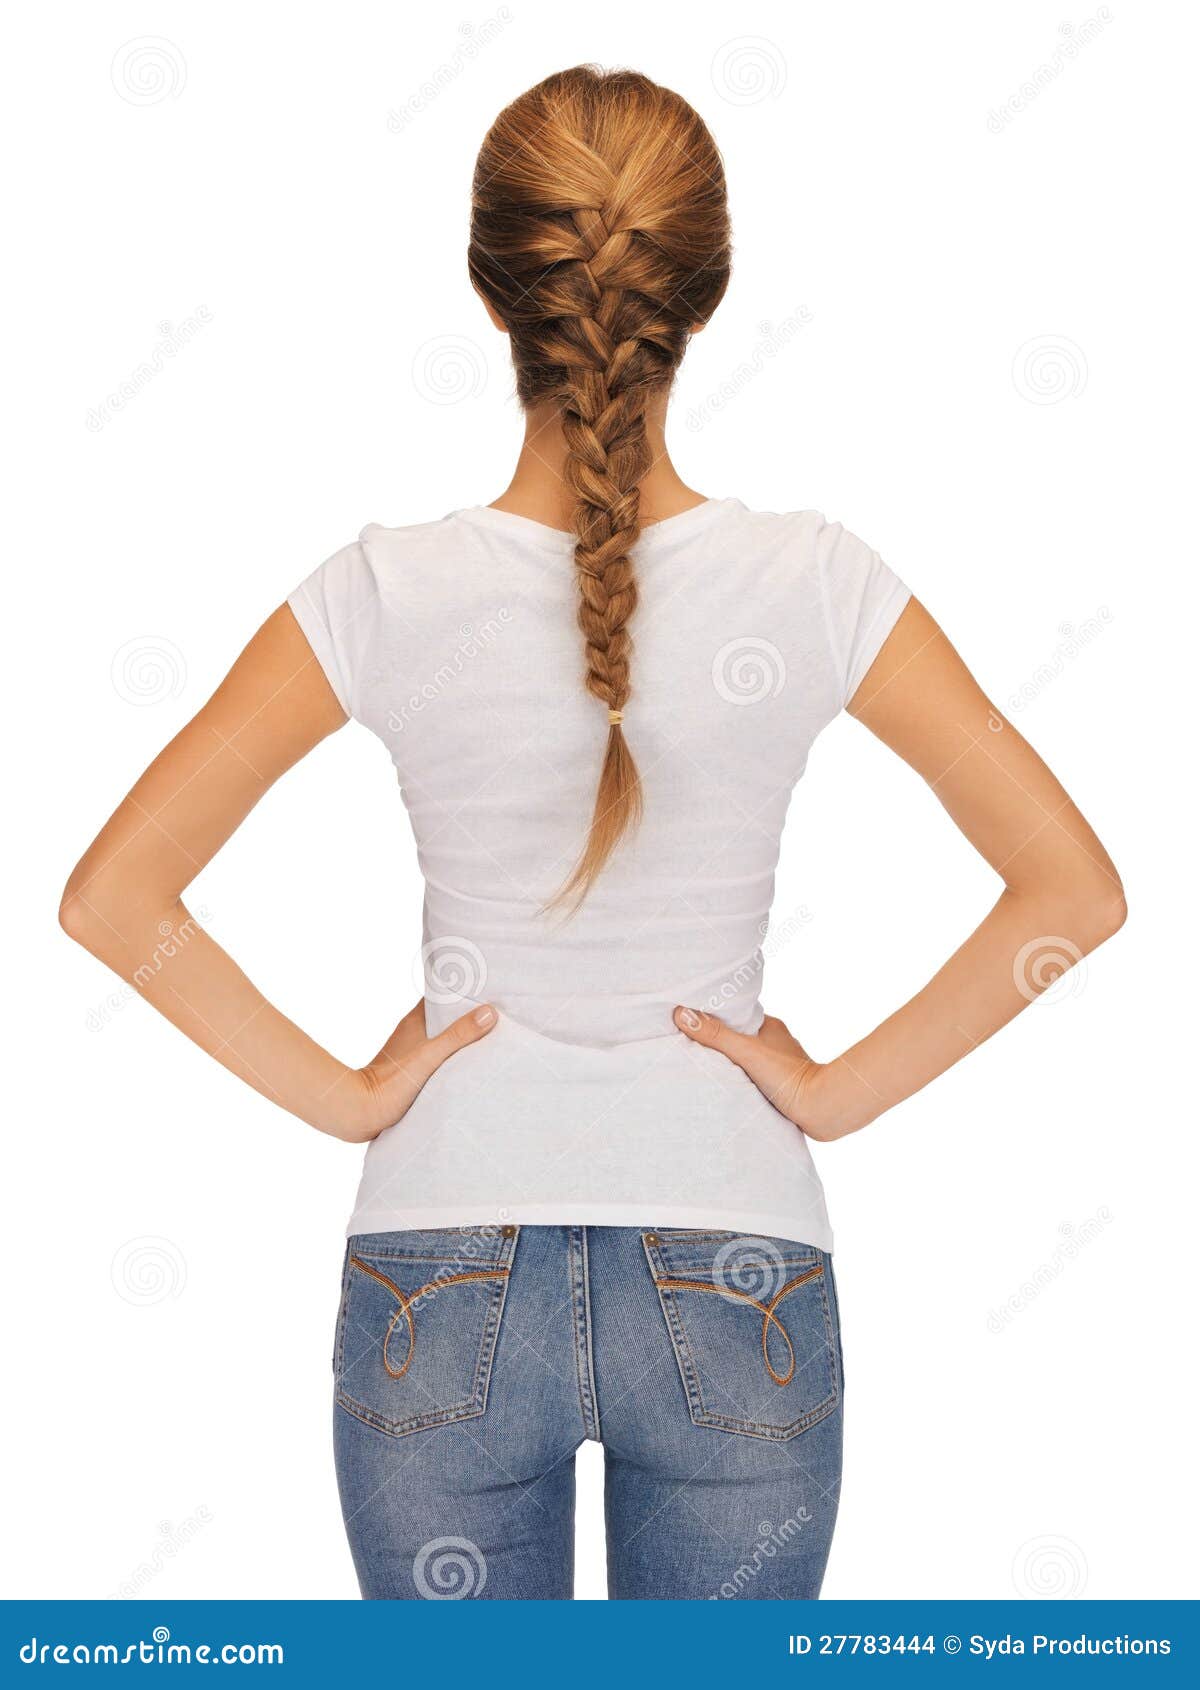 Download Rear View Of Woman In Blank White T-shirt Stock Images ...